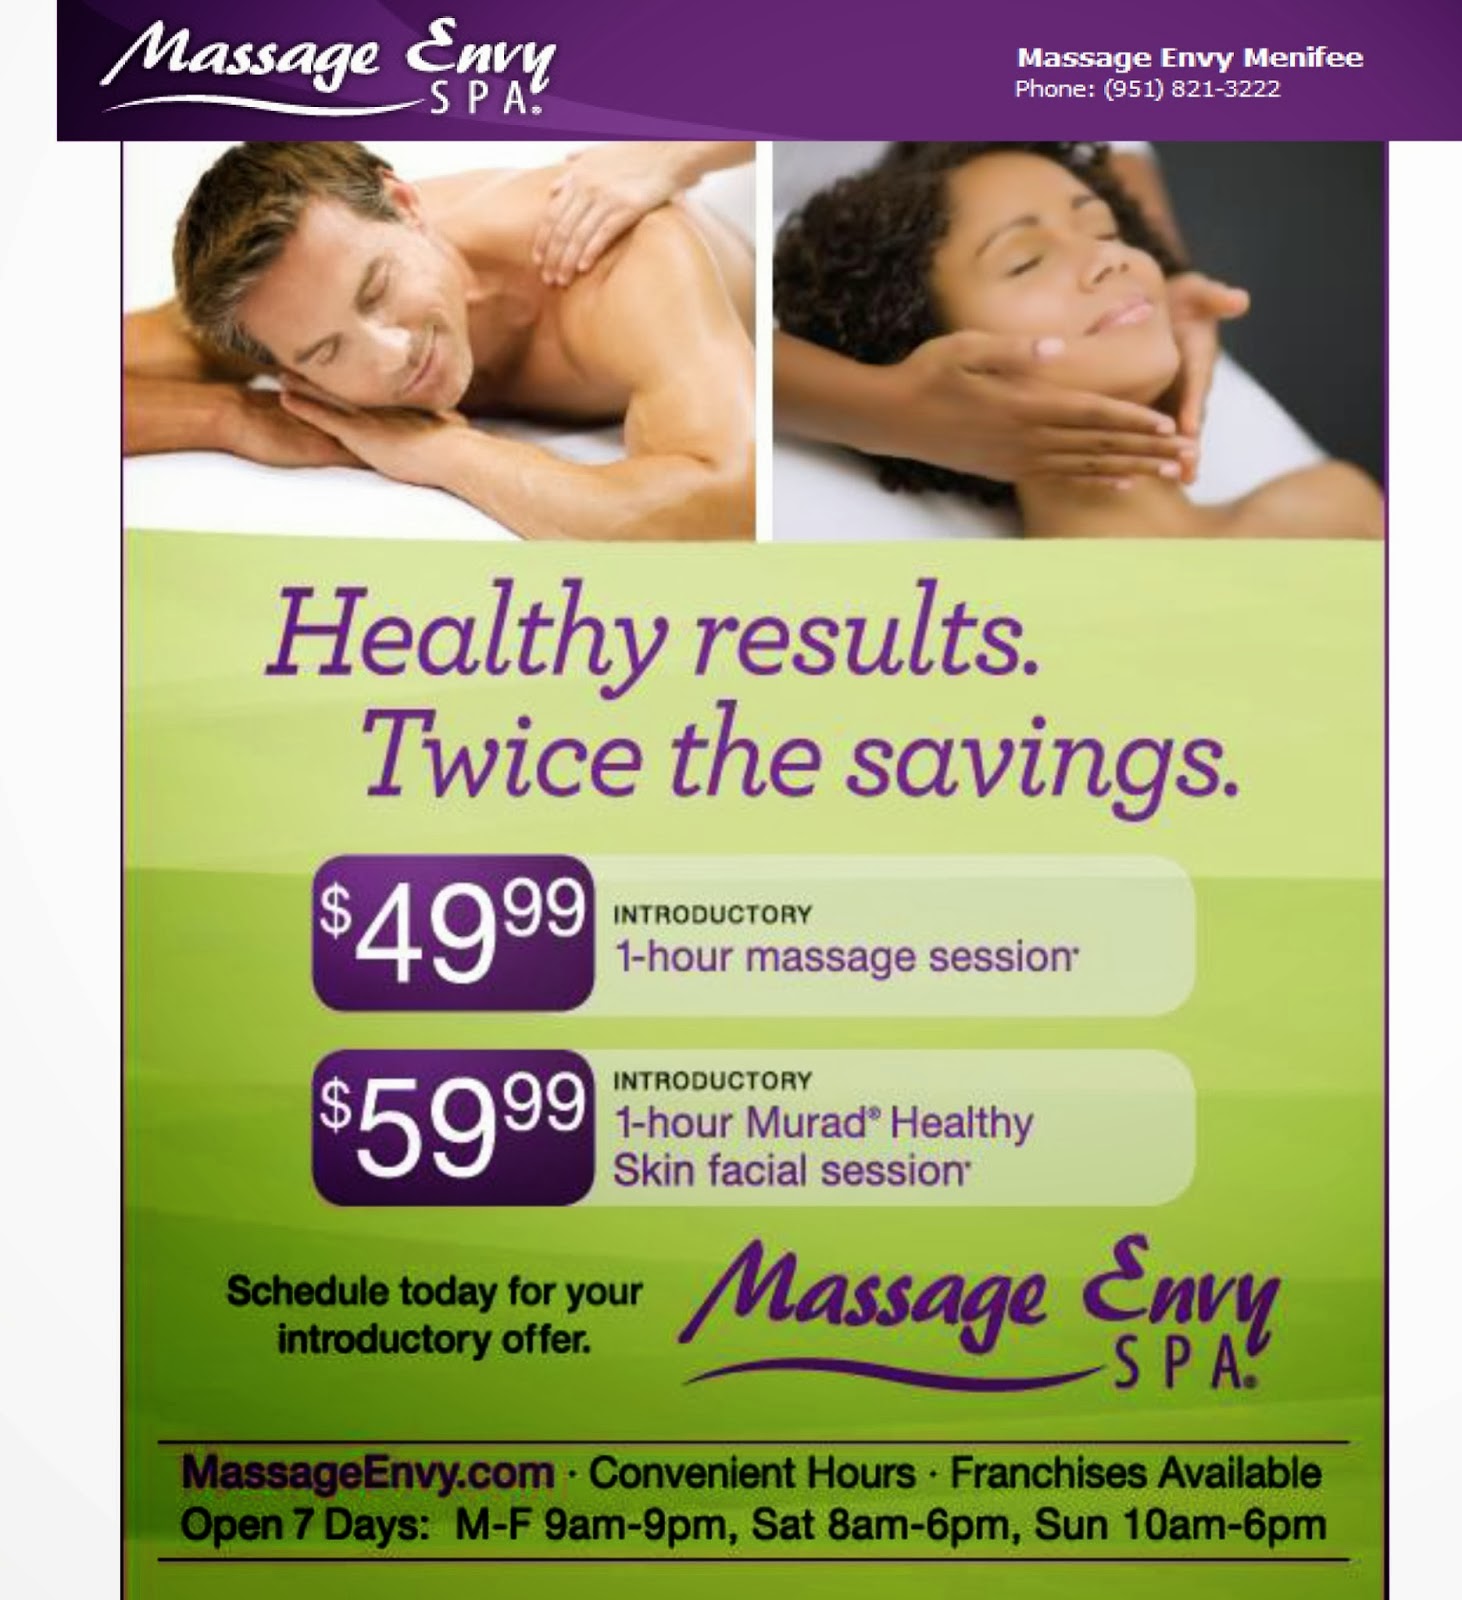 Introductory Offers from Massage Envy.